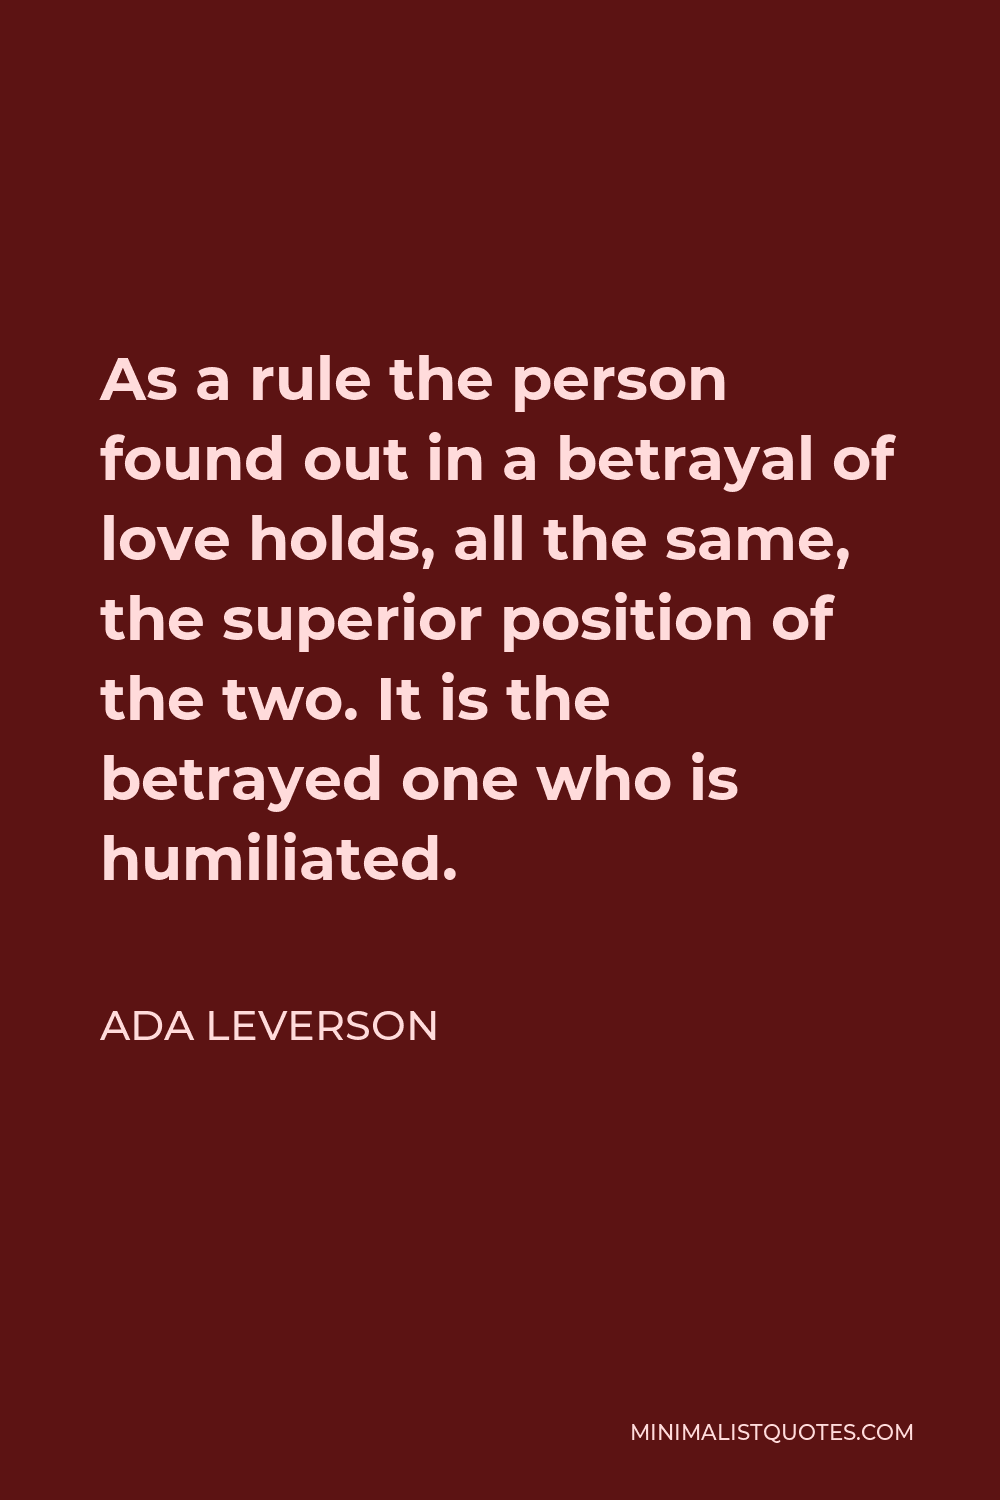 Ada Leverson Quote - As a rule the person found out in a betrayal of love holds, all the same, the superior position of the two. It is the betrayed one who is humiliated.